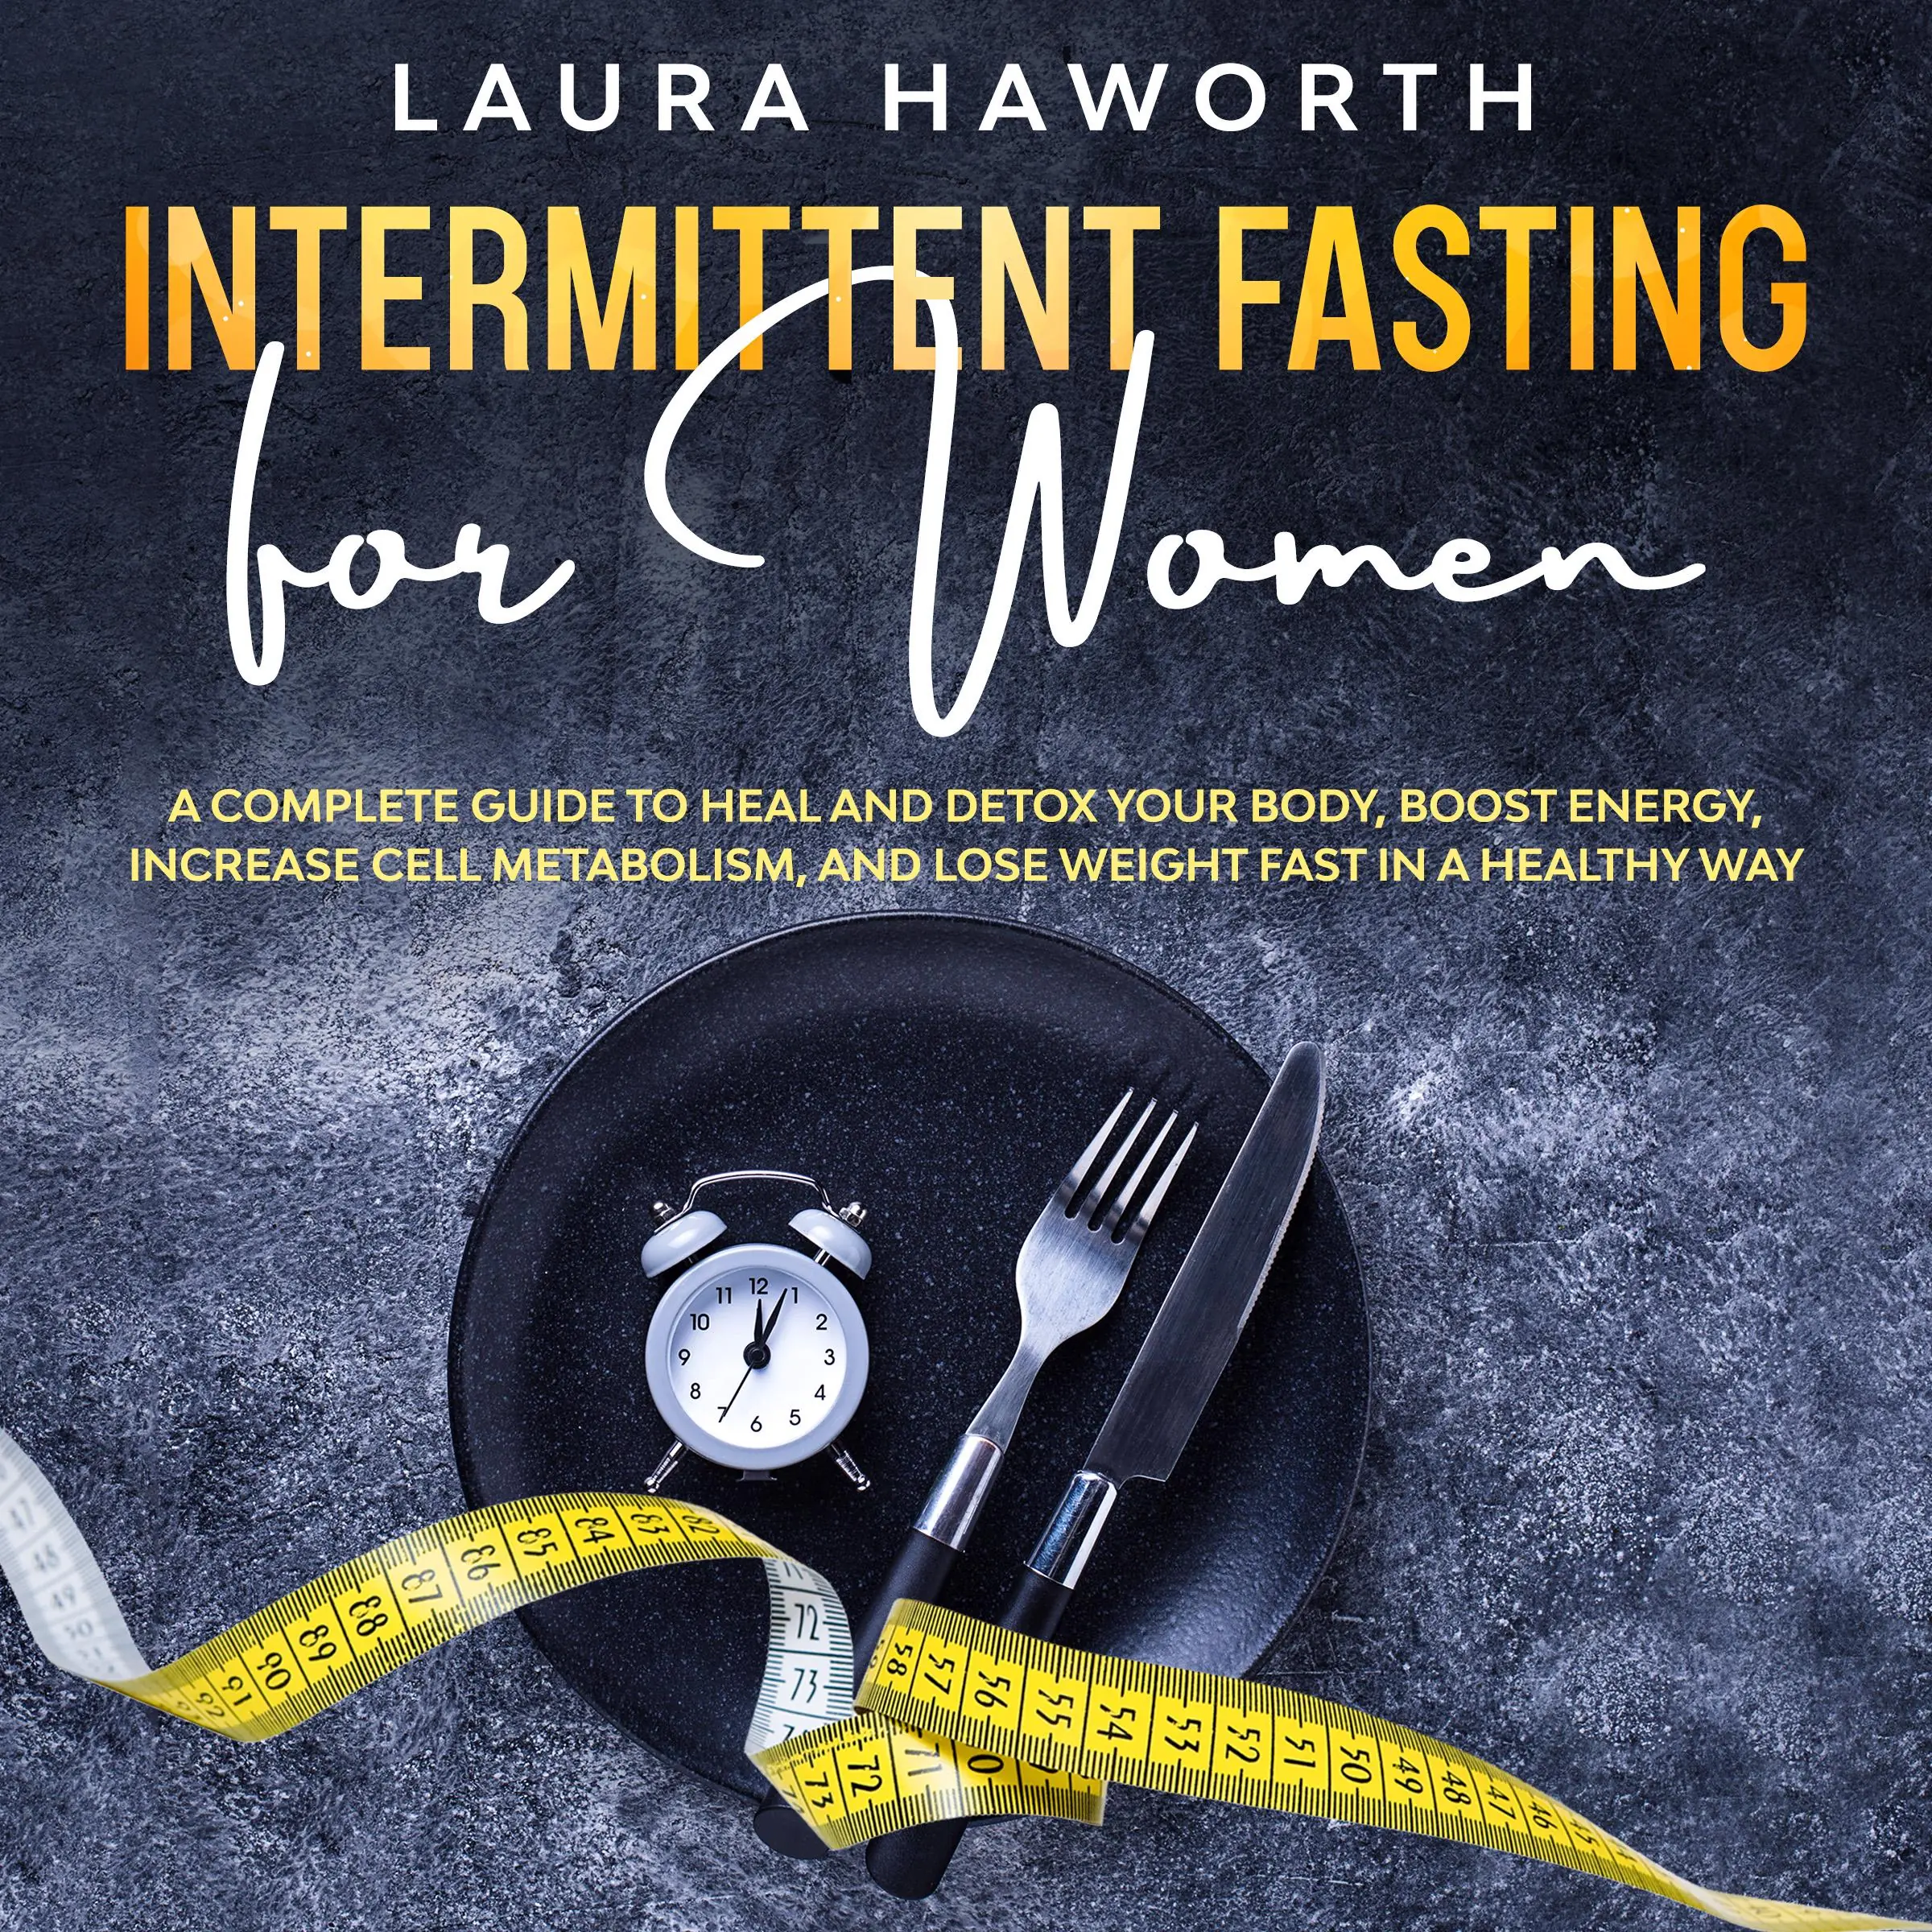 Intermittent Fasting for Women: A Complete Guide to Heal and Detox Your Body, Boost Energy, Increase Cell Metabolism, and Lose Weight Fast in a Healthy Way Audiobook by Laura Haworth